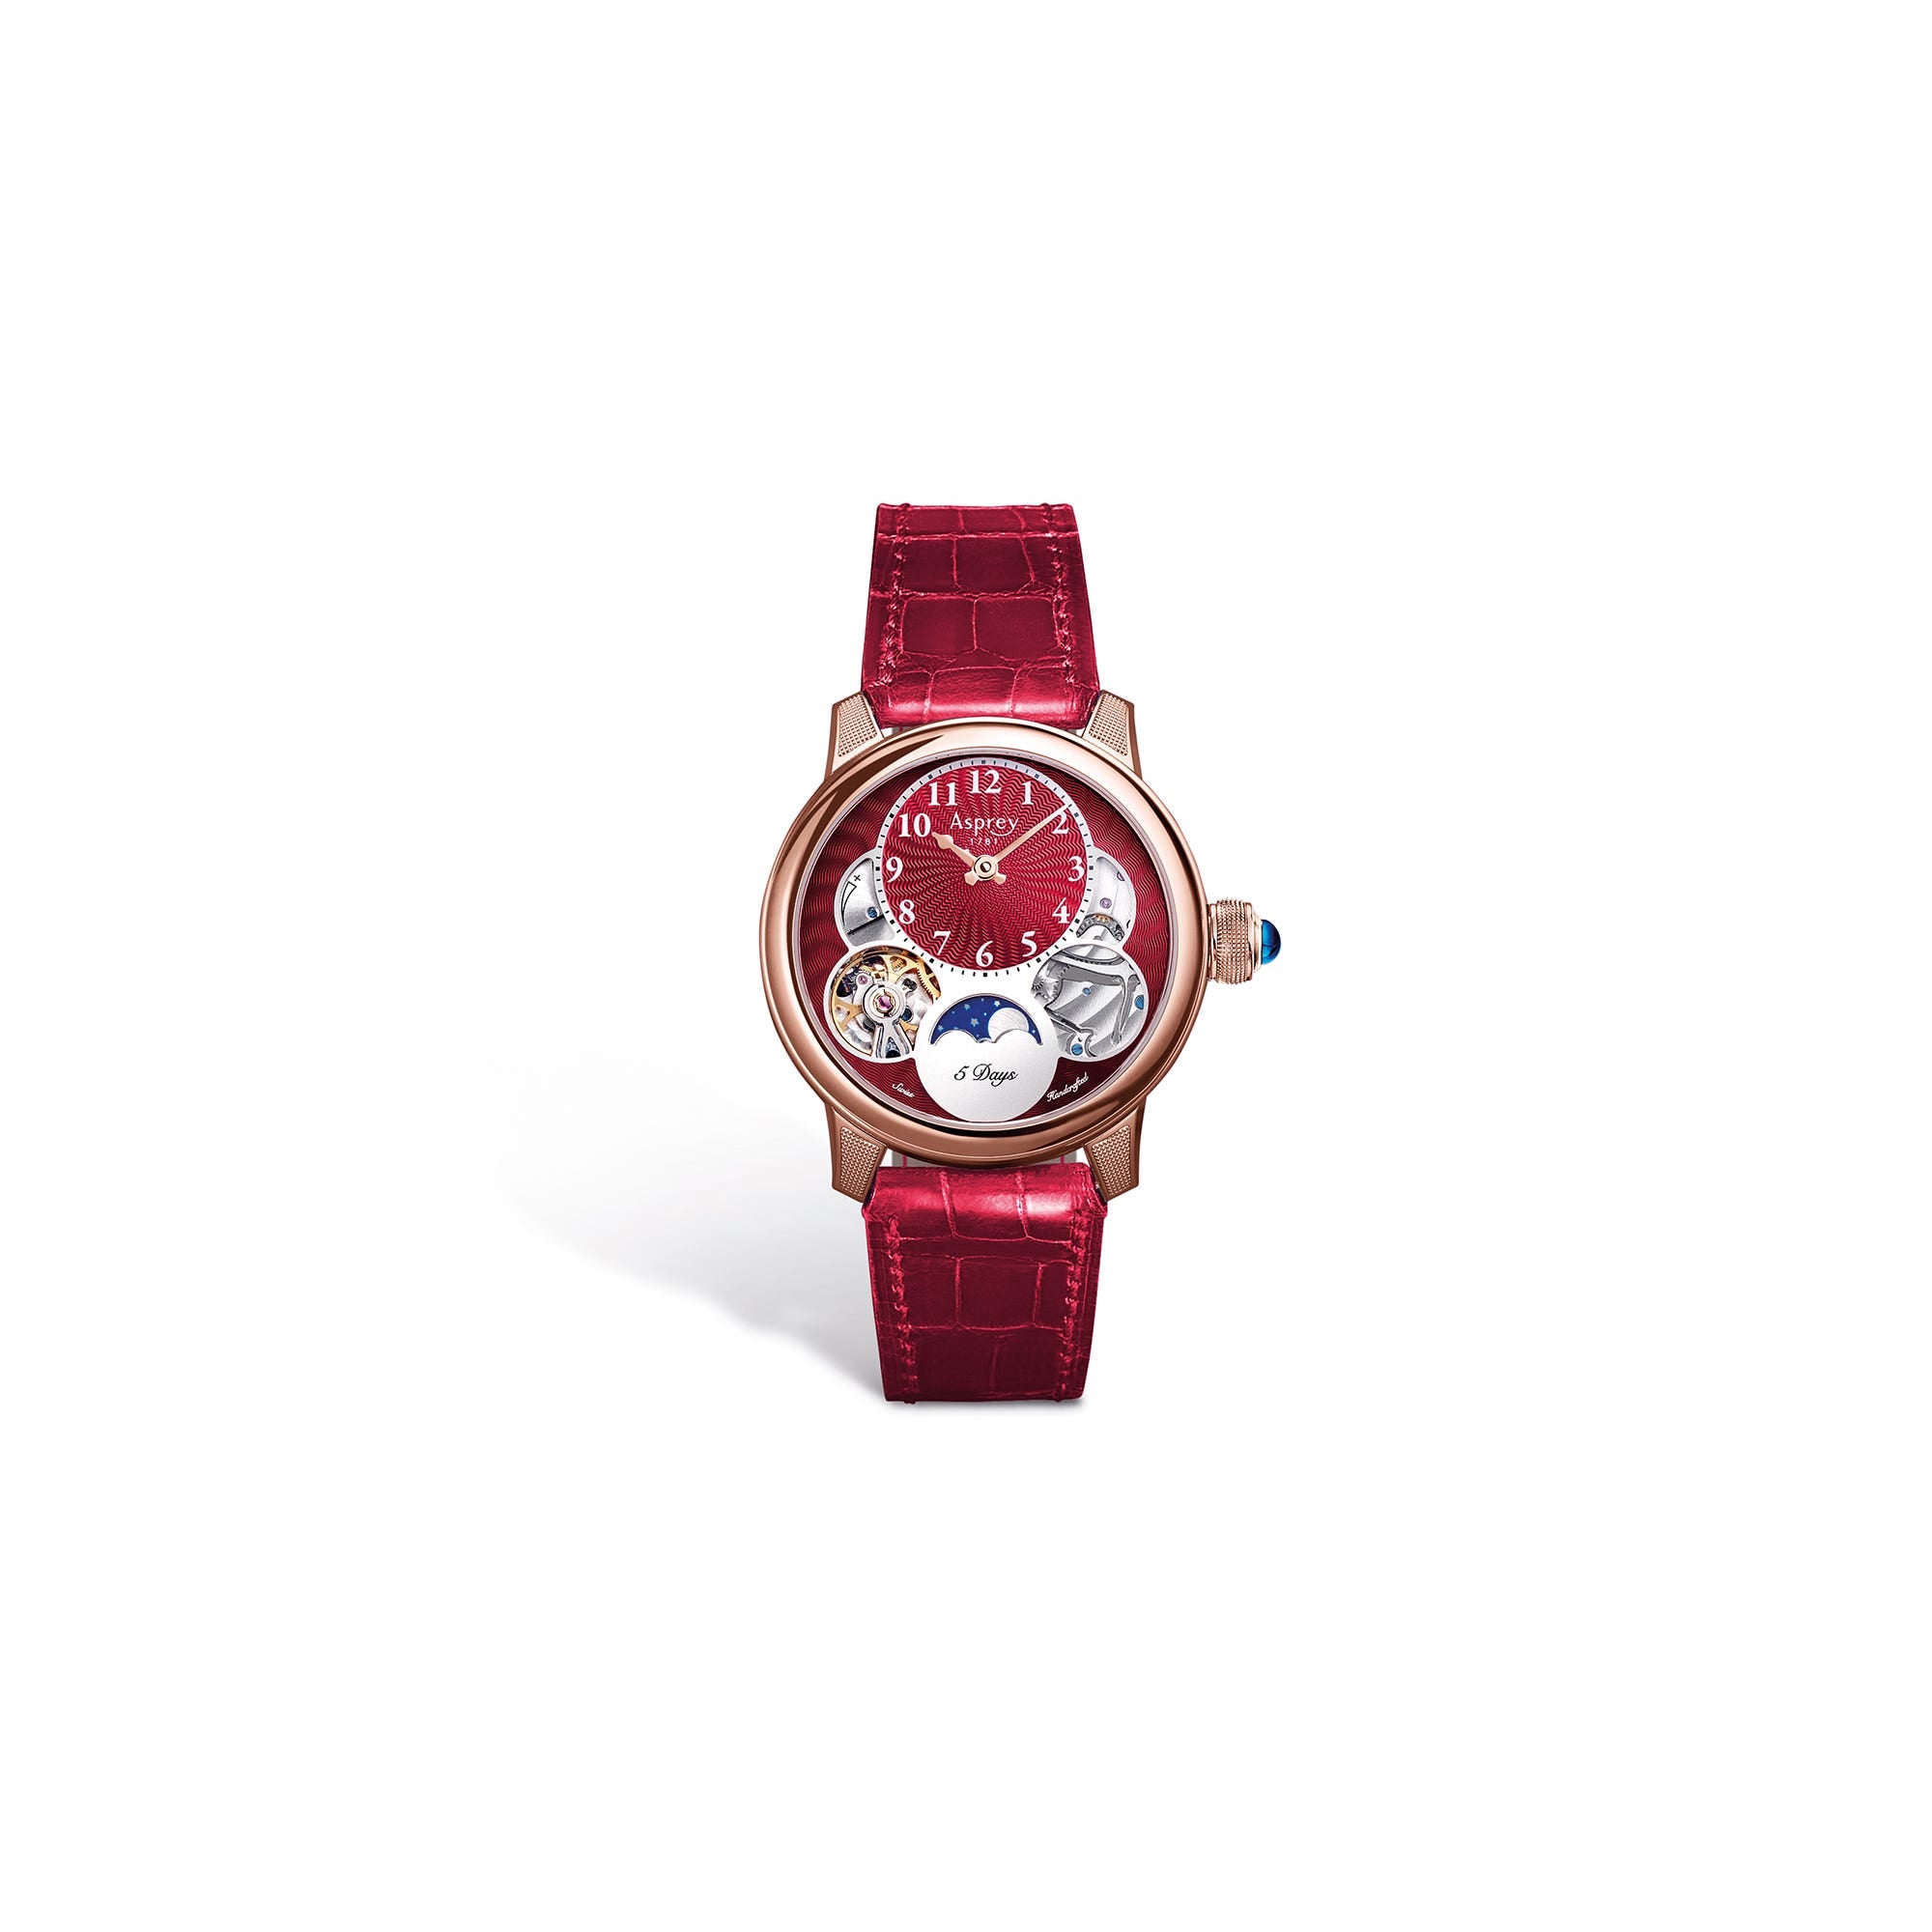 Sotheby's Sells One-of-a-Kind Asprey-Signed Ref. 2499 for a Record USD  3,879,843 - Revolution Watch